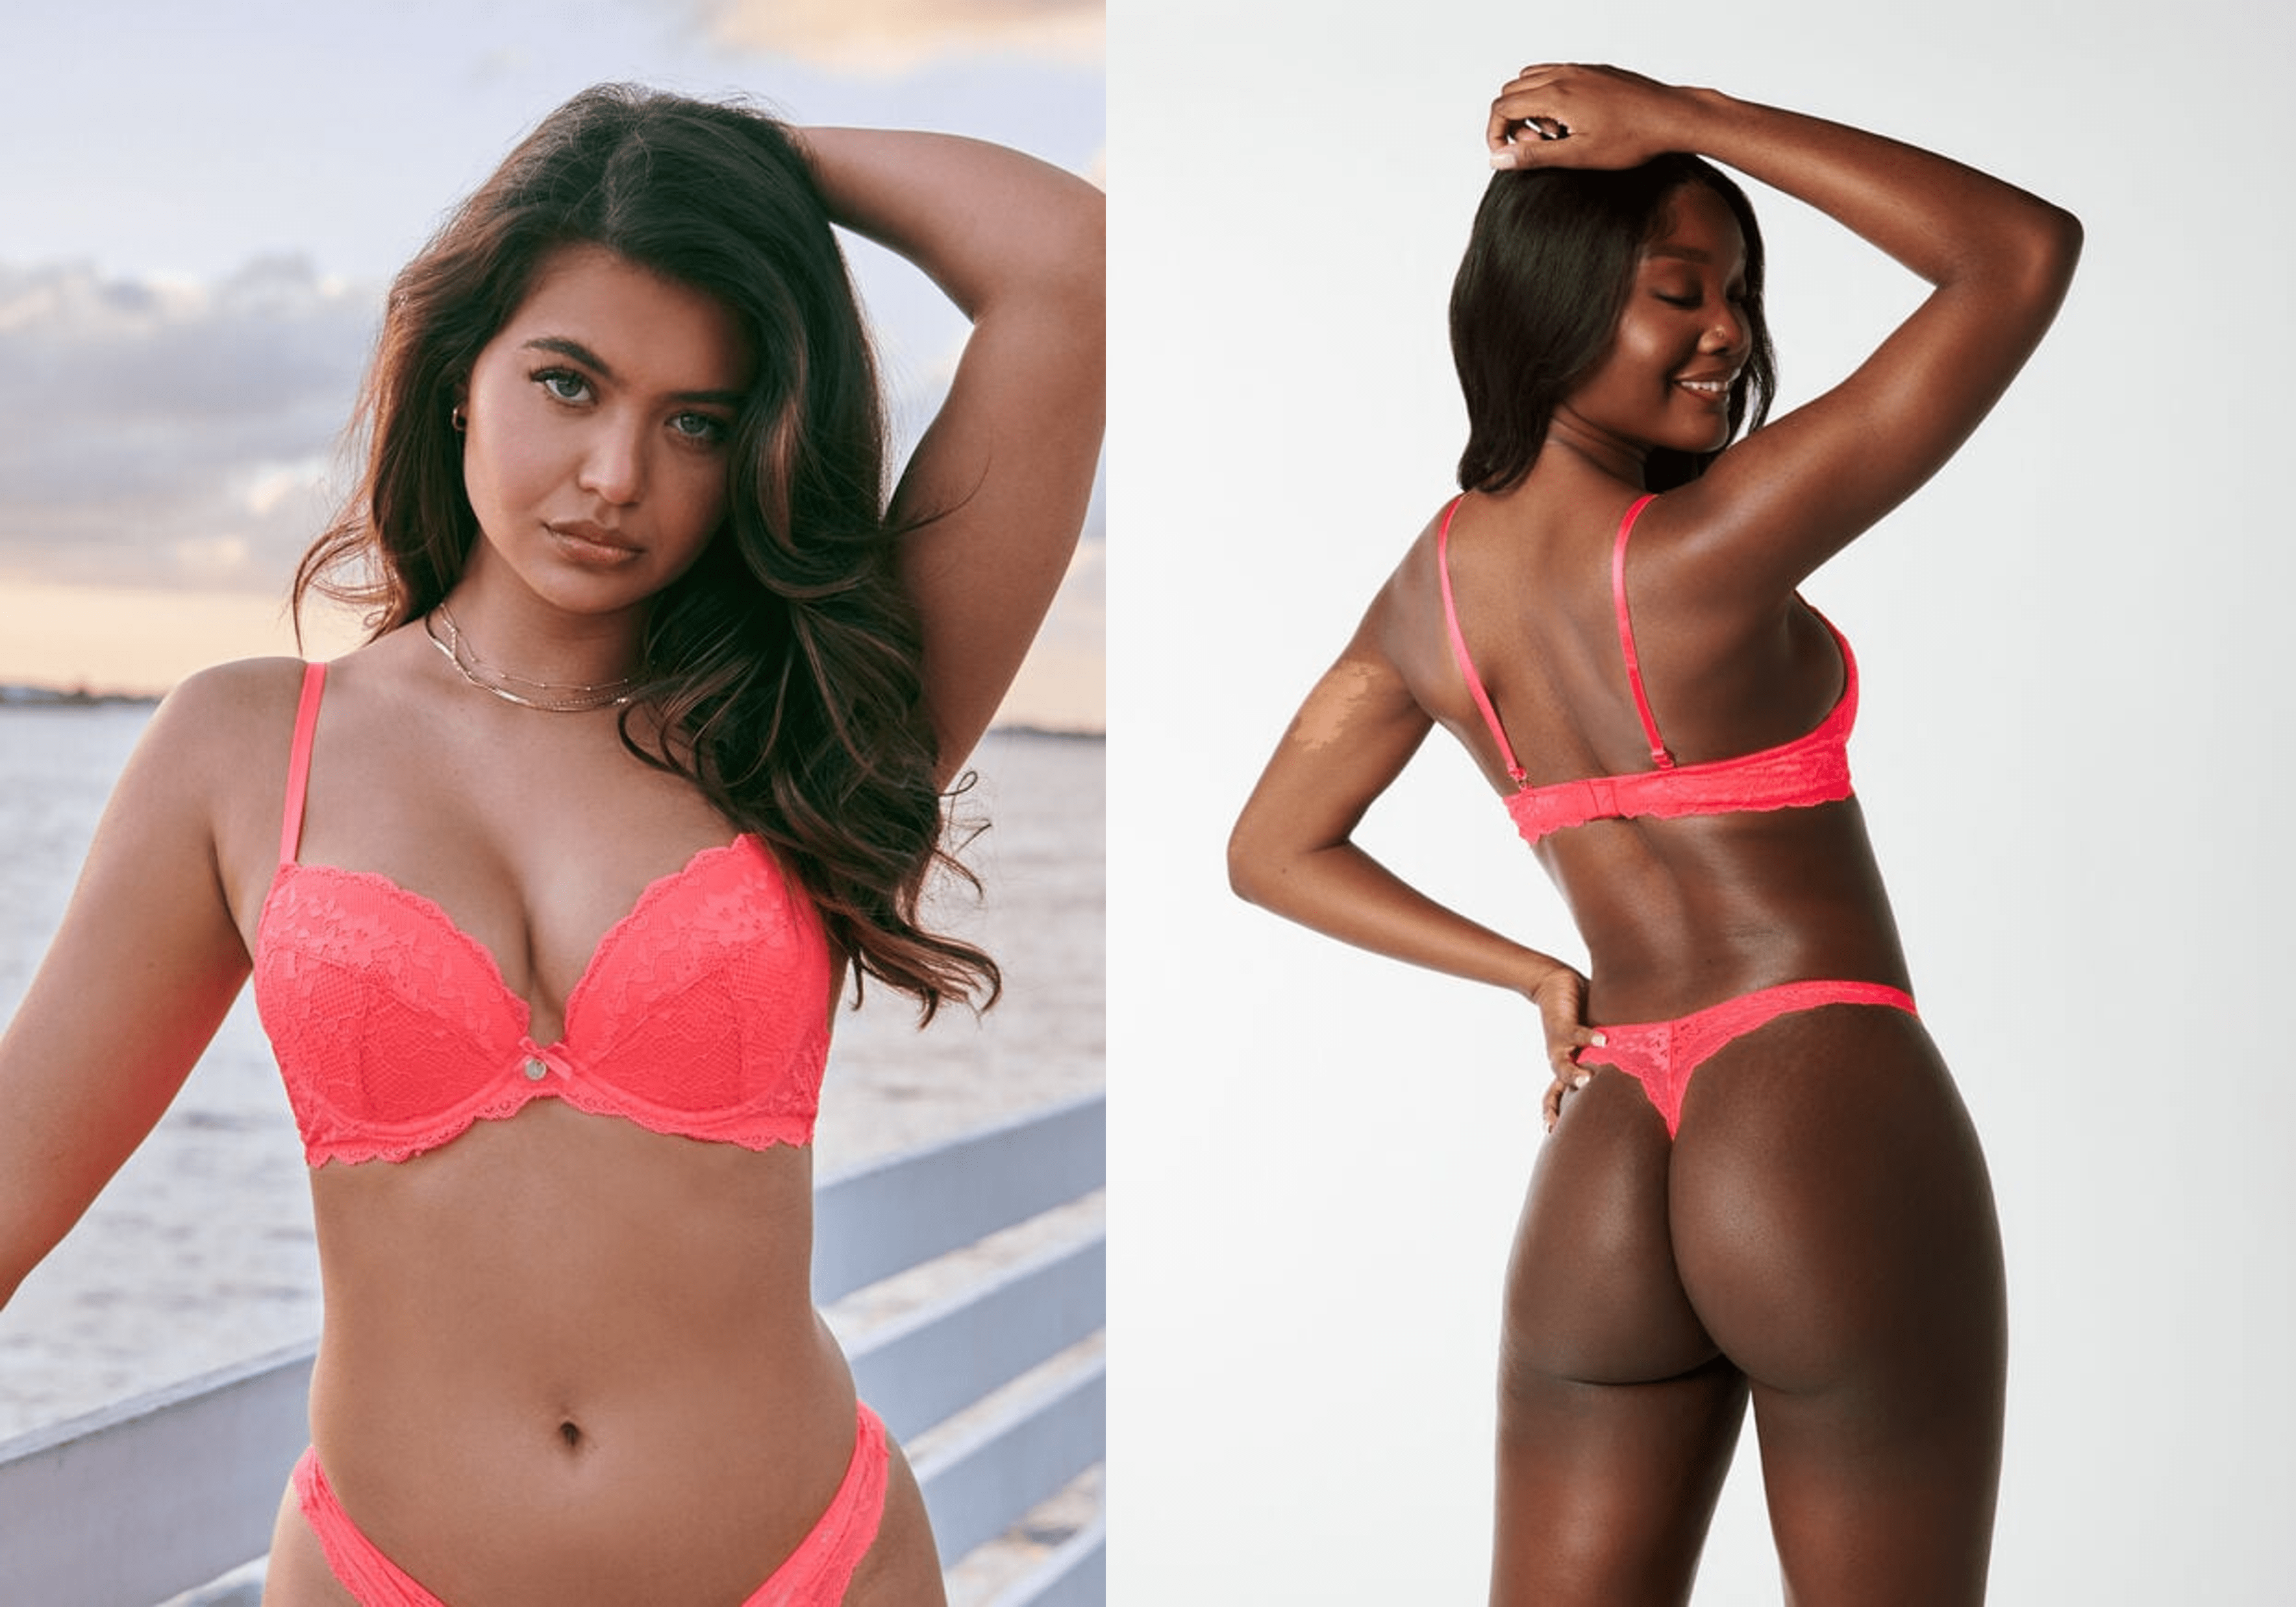 https://www.bouxavenue.com/on/demandware.static/-/Sites-bouxavenue-global-Library/default/dwec0fe420/NATIONAL-LINGERIE-DAY-AIYAH-min.png